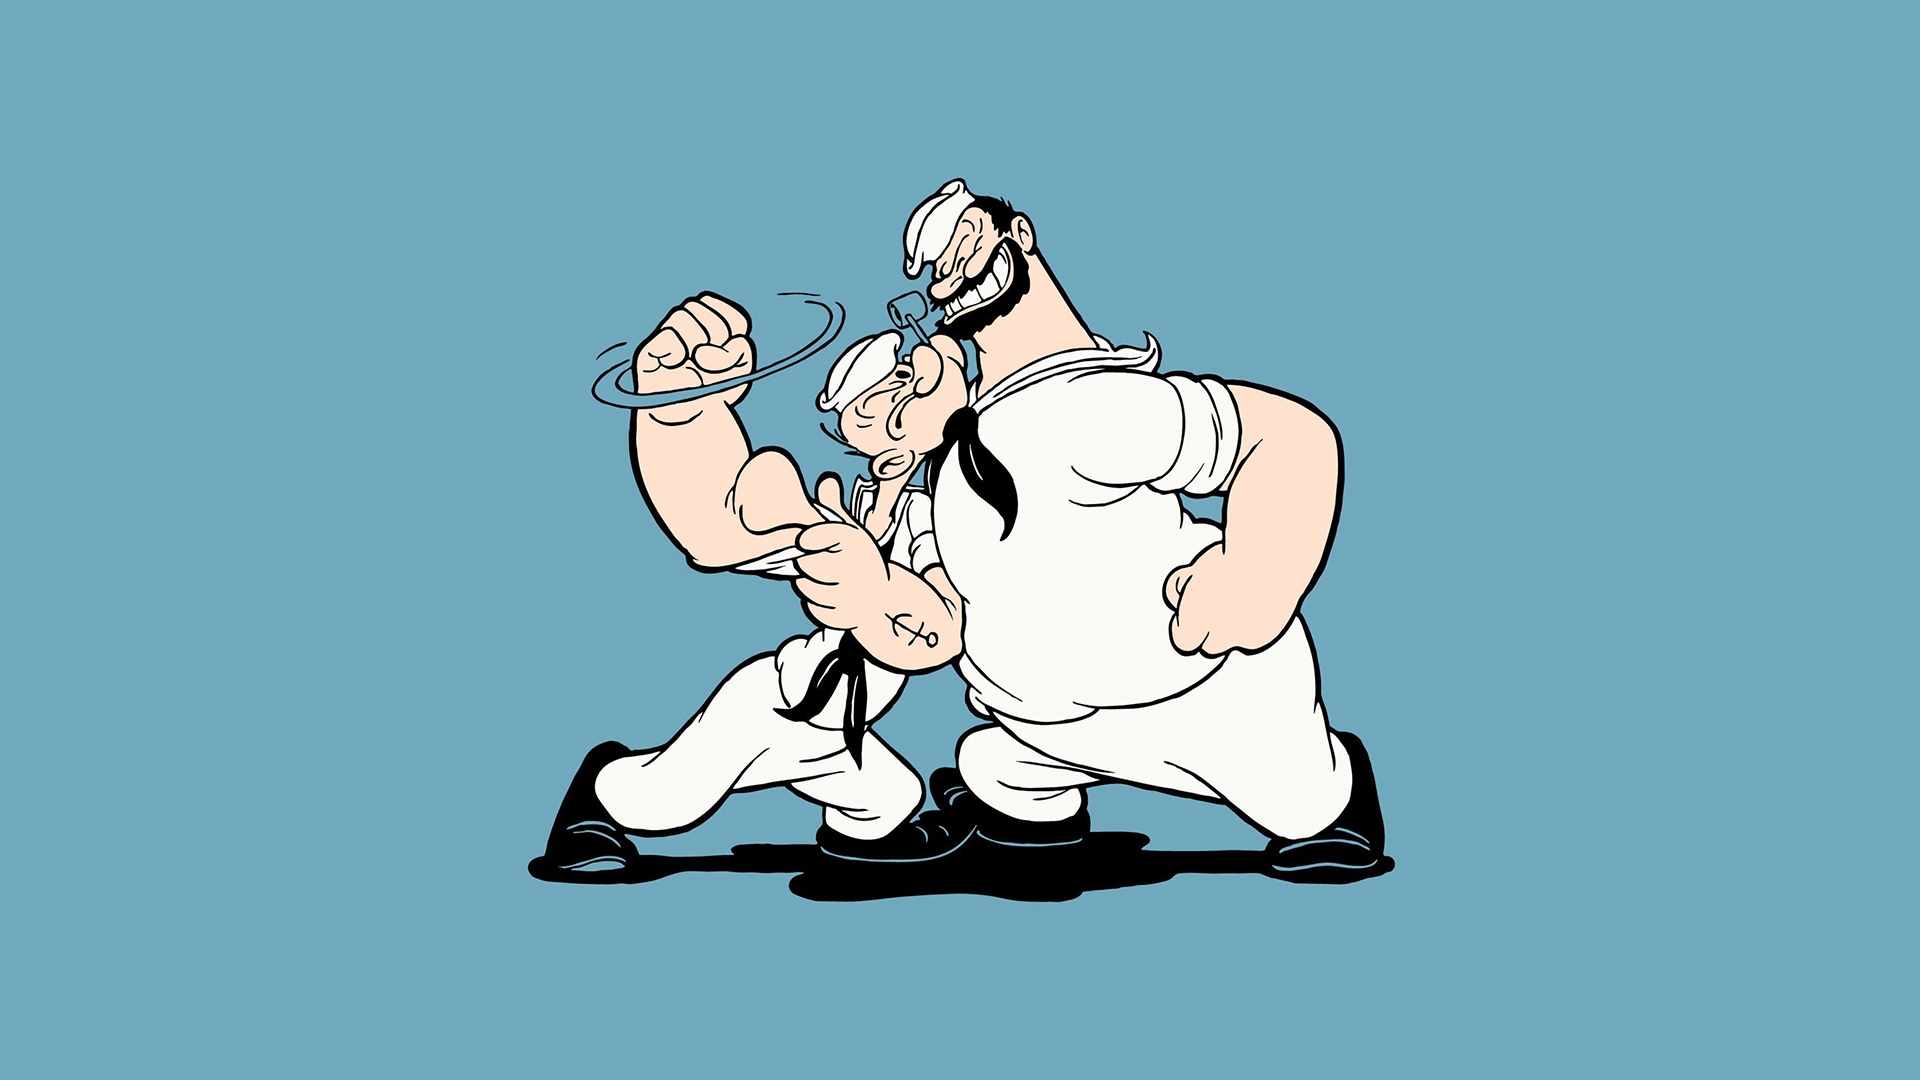 Original - Popeye The Sailor And Bluto , HD Wallpaper & Backgrounds